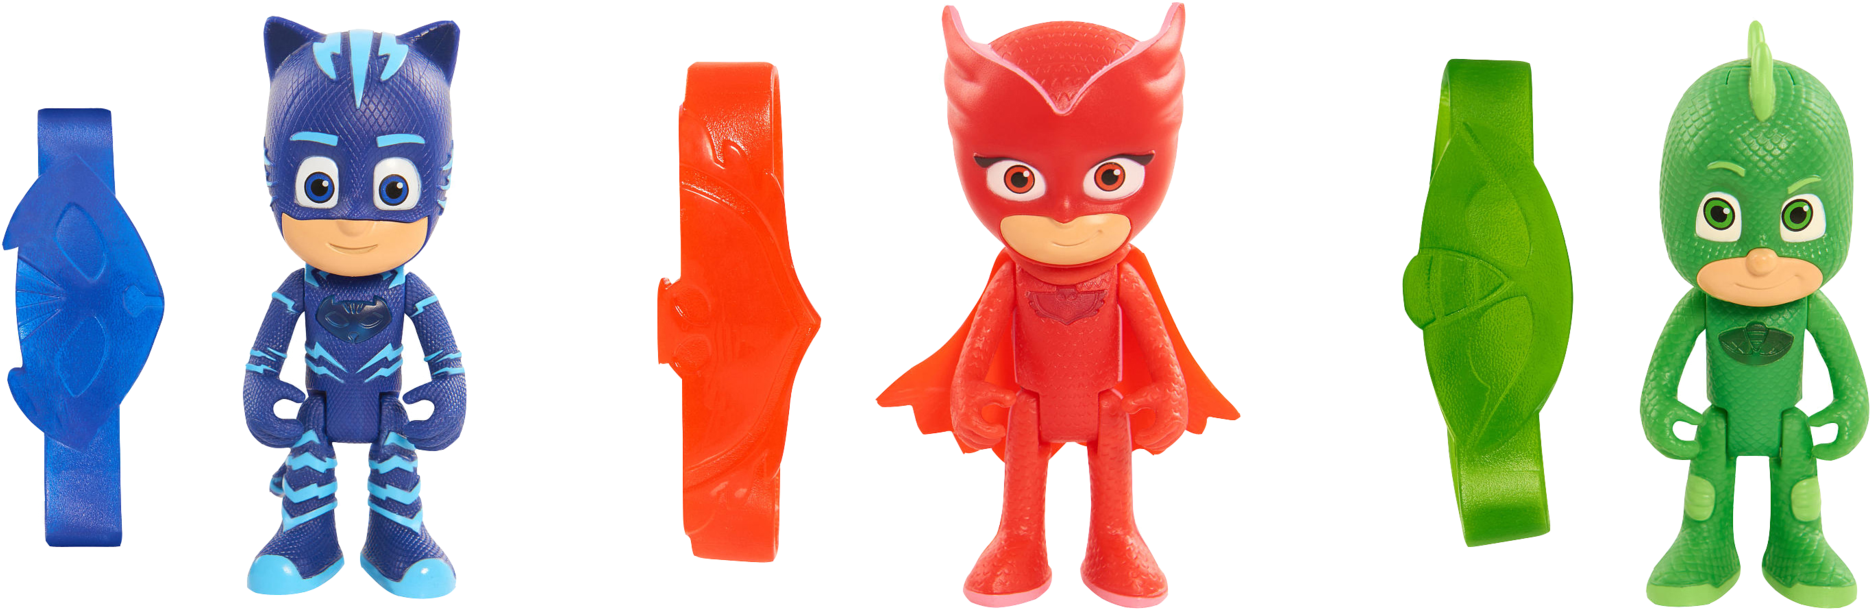 A Red Toy With A Mask And Cape